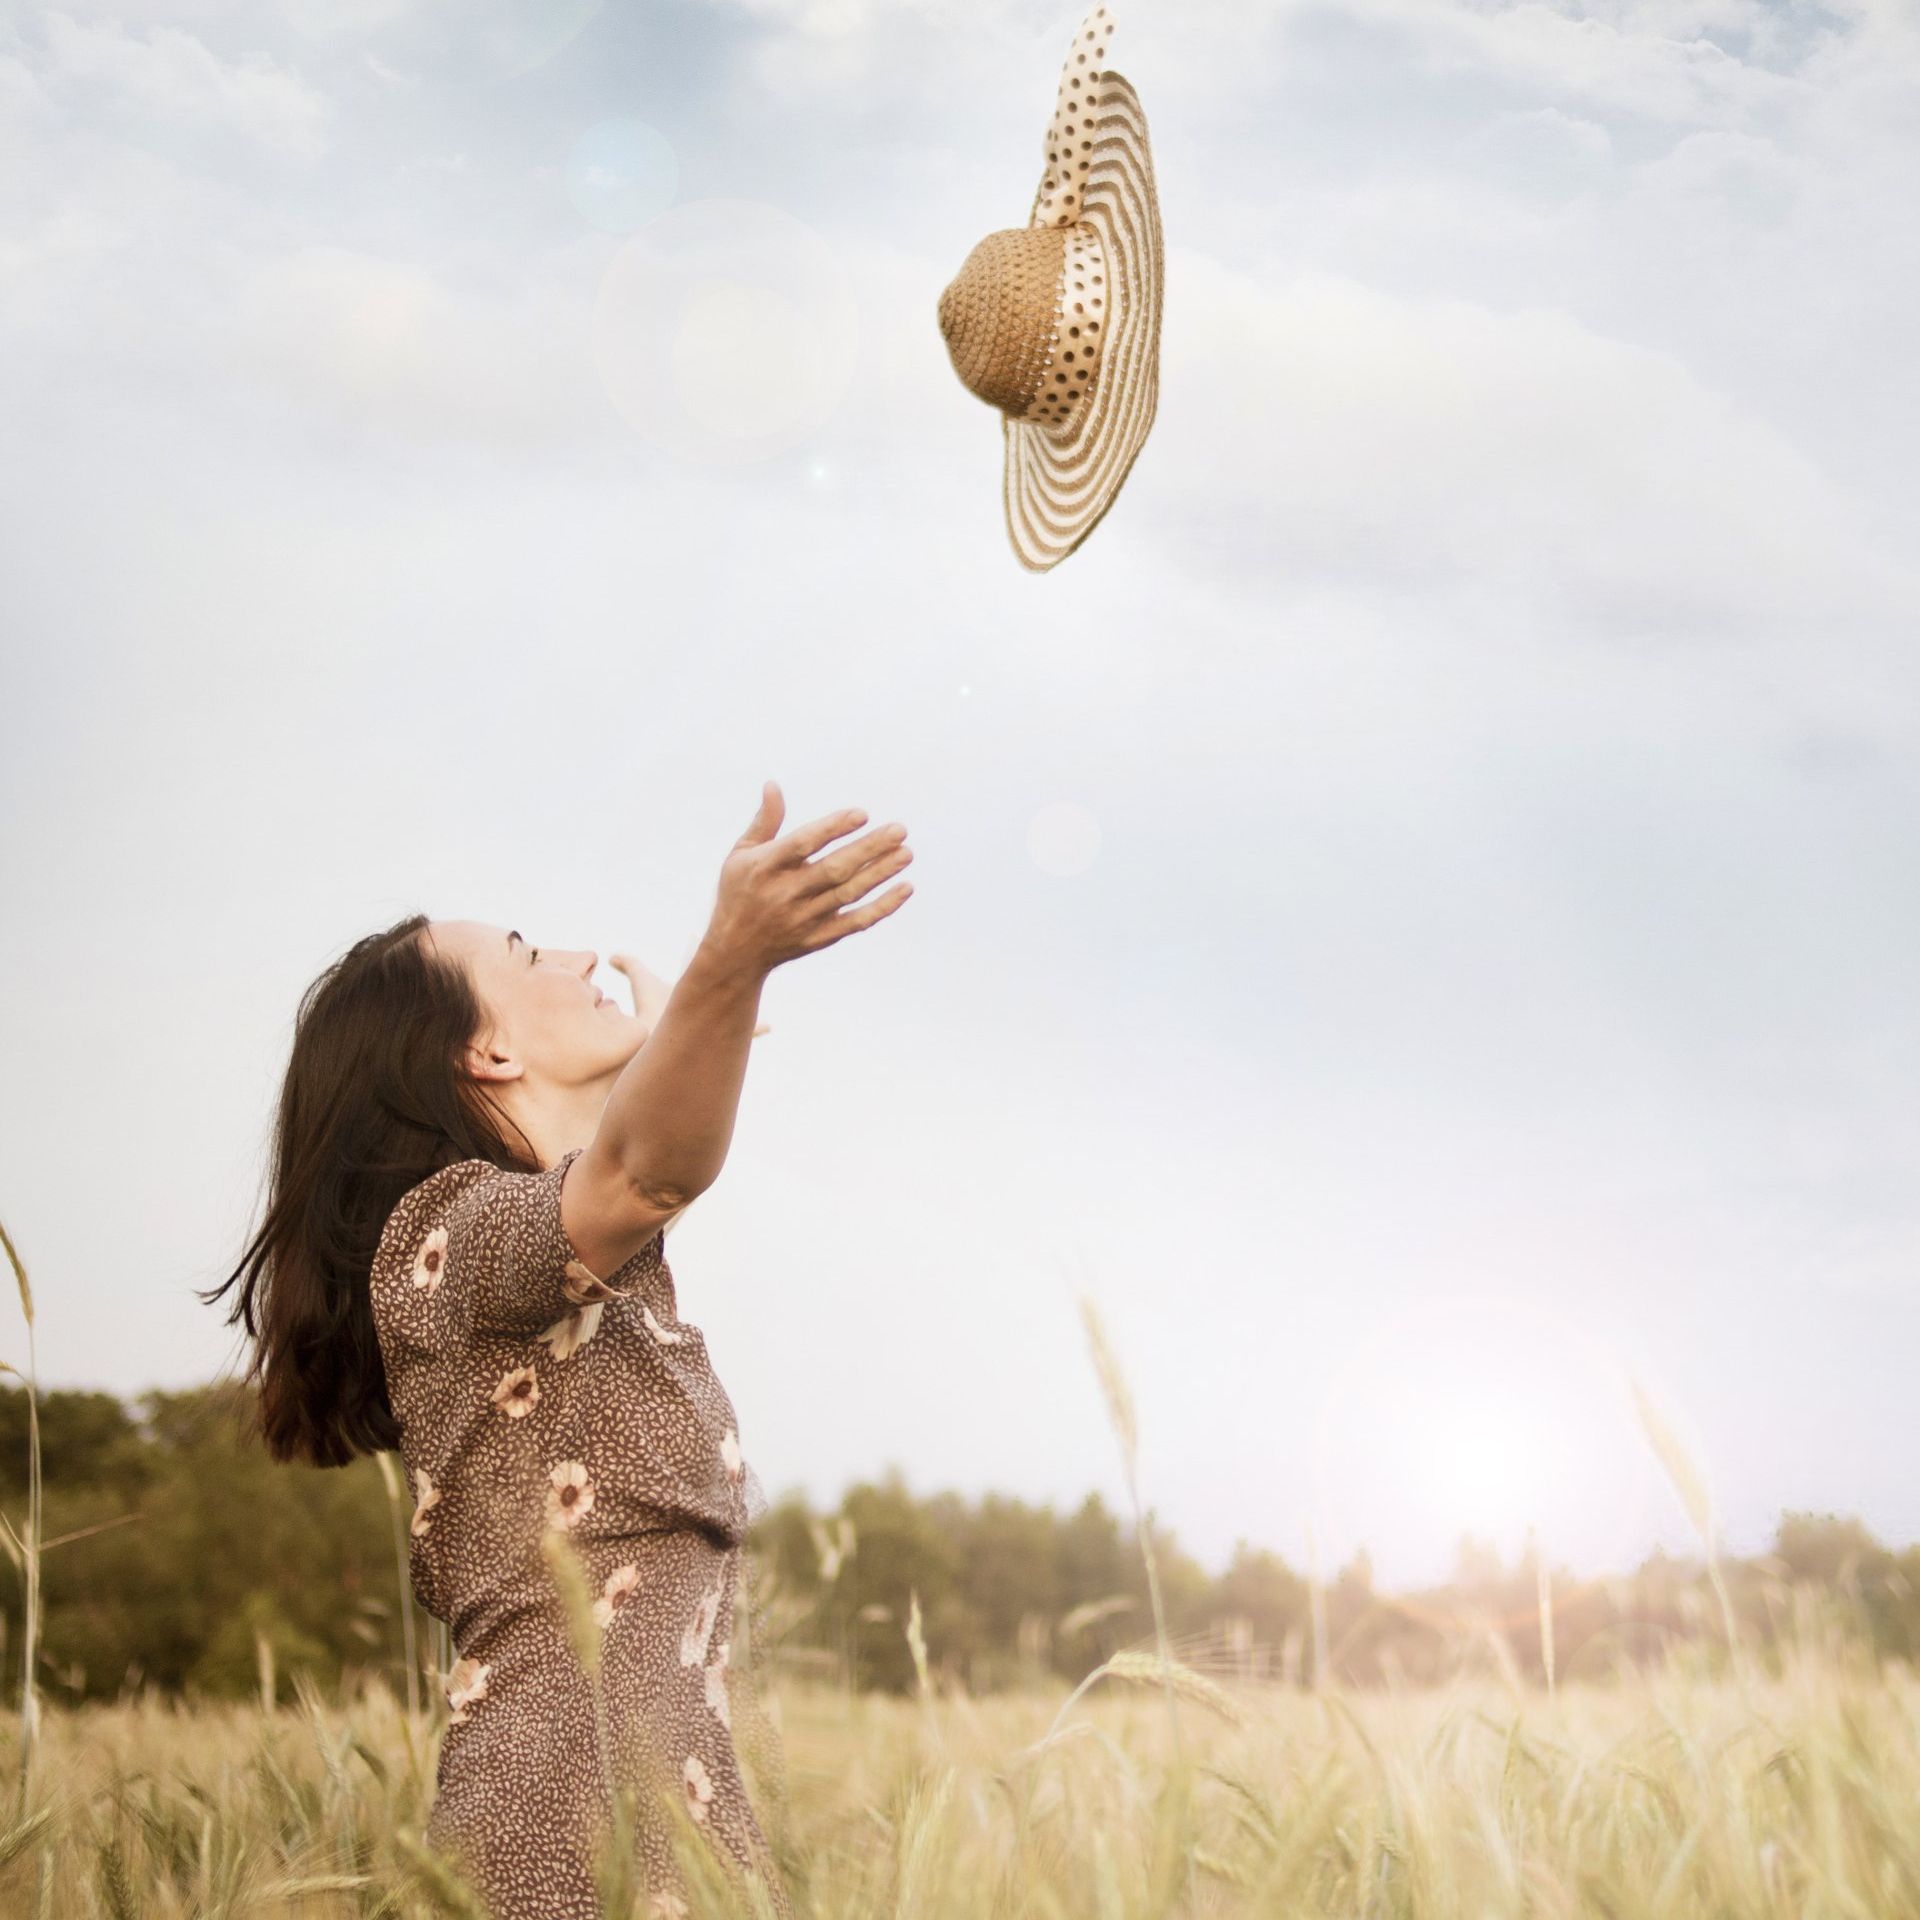 woman in wheat field tossing her straw hat into the air